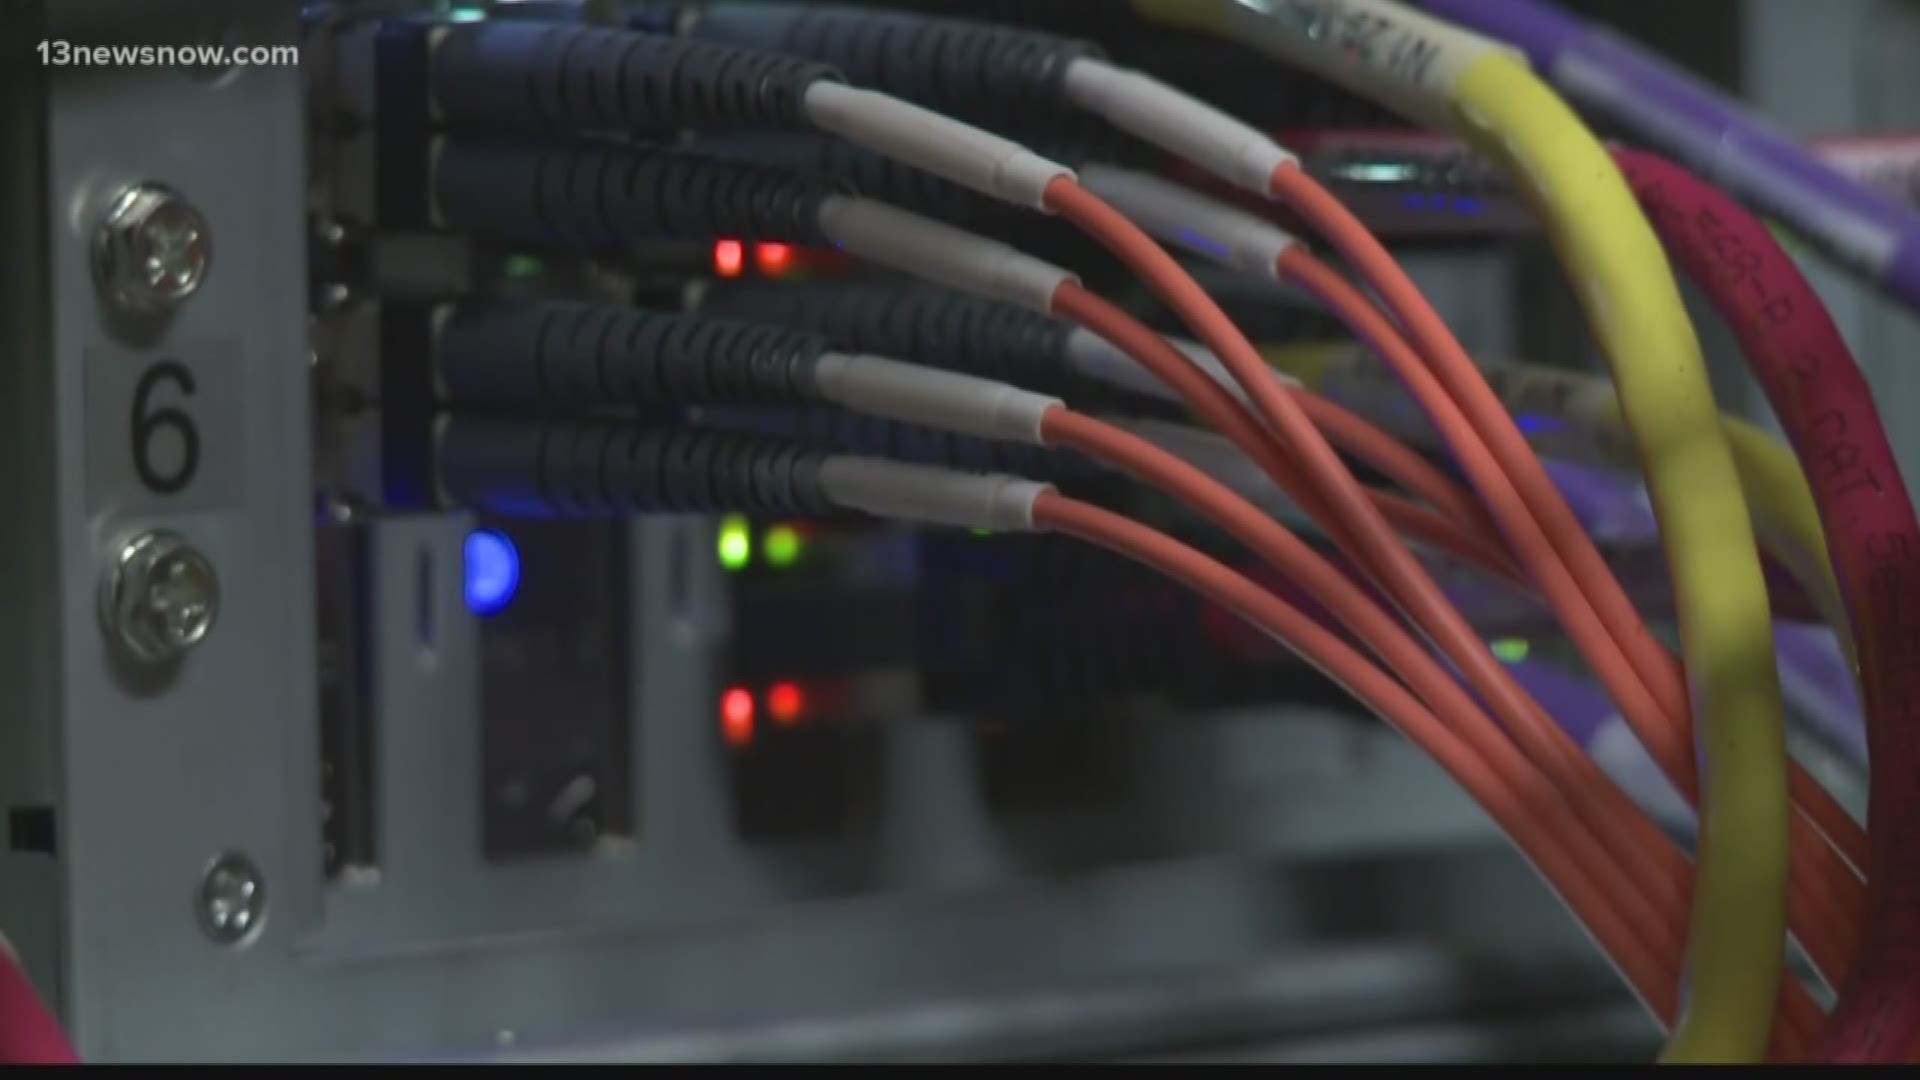 The City of Portsmouth is working to boost internet access throughout the community.